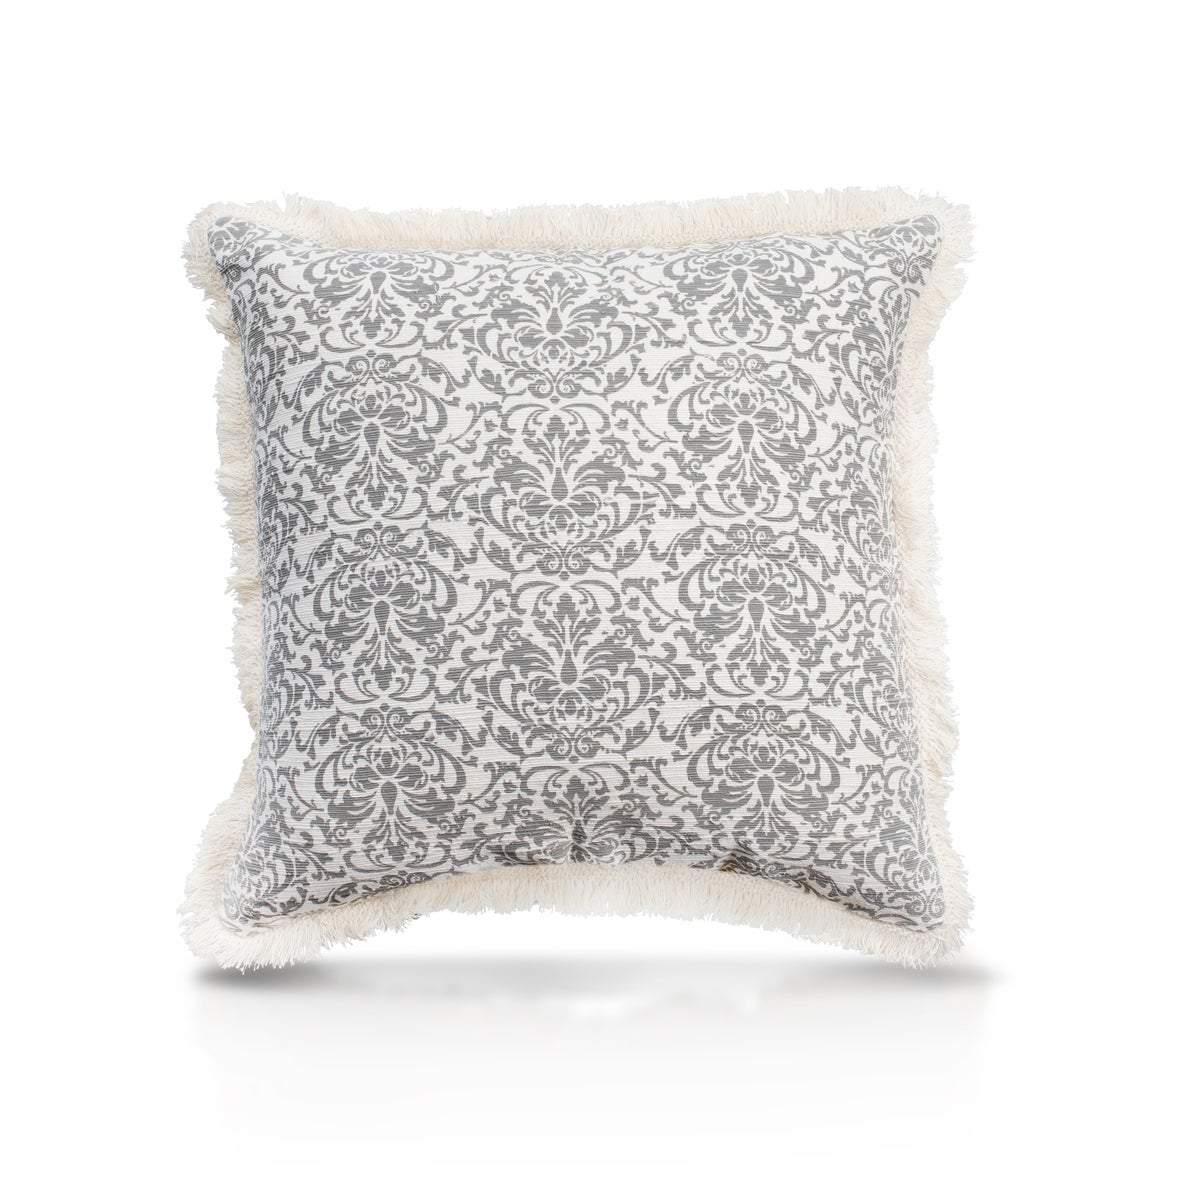 Pillow, 20" with Fringe - Damask, Cool Gray